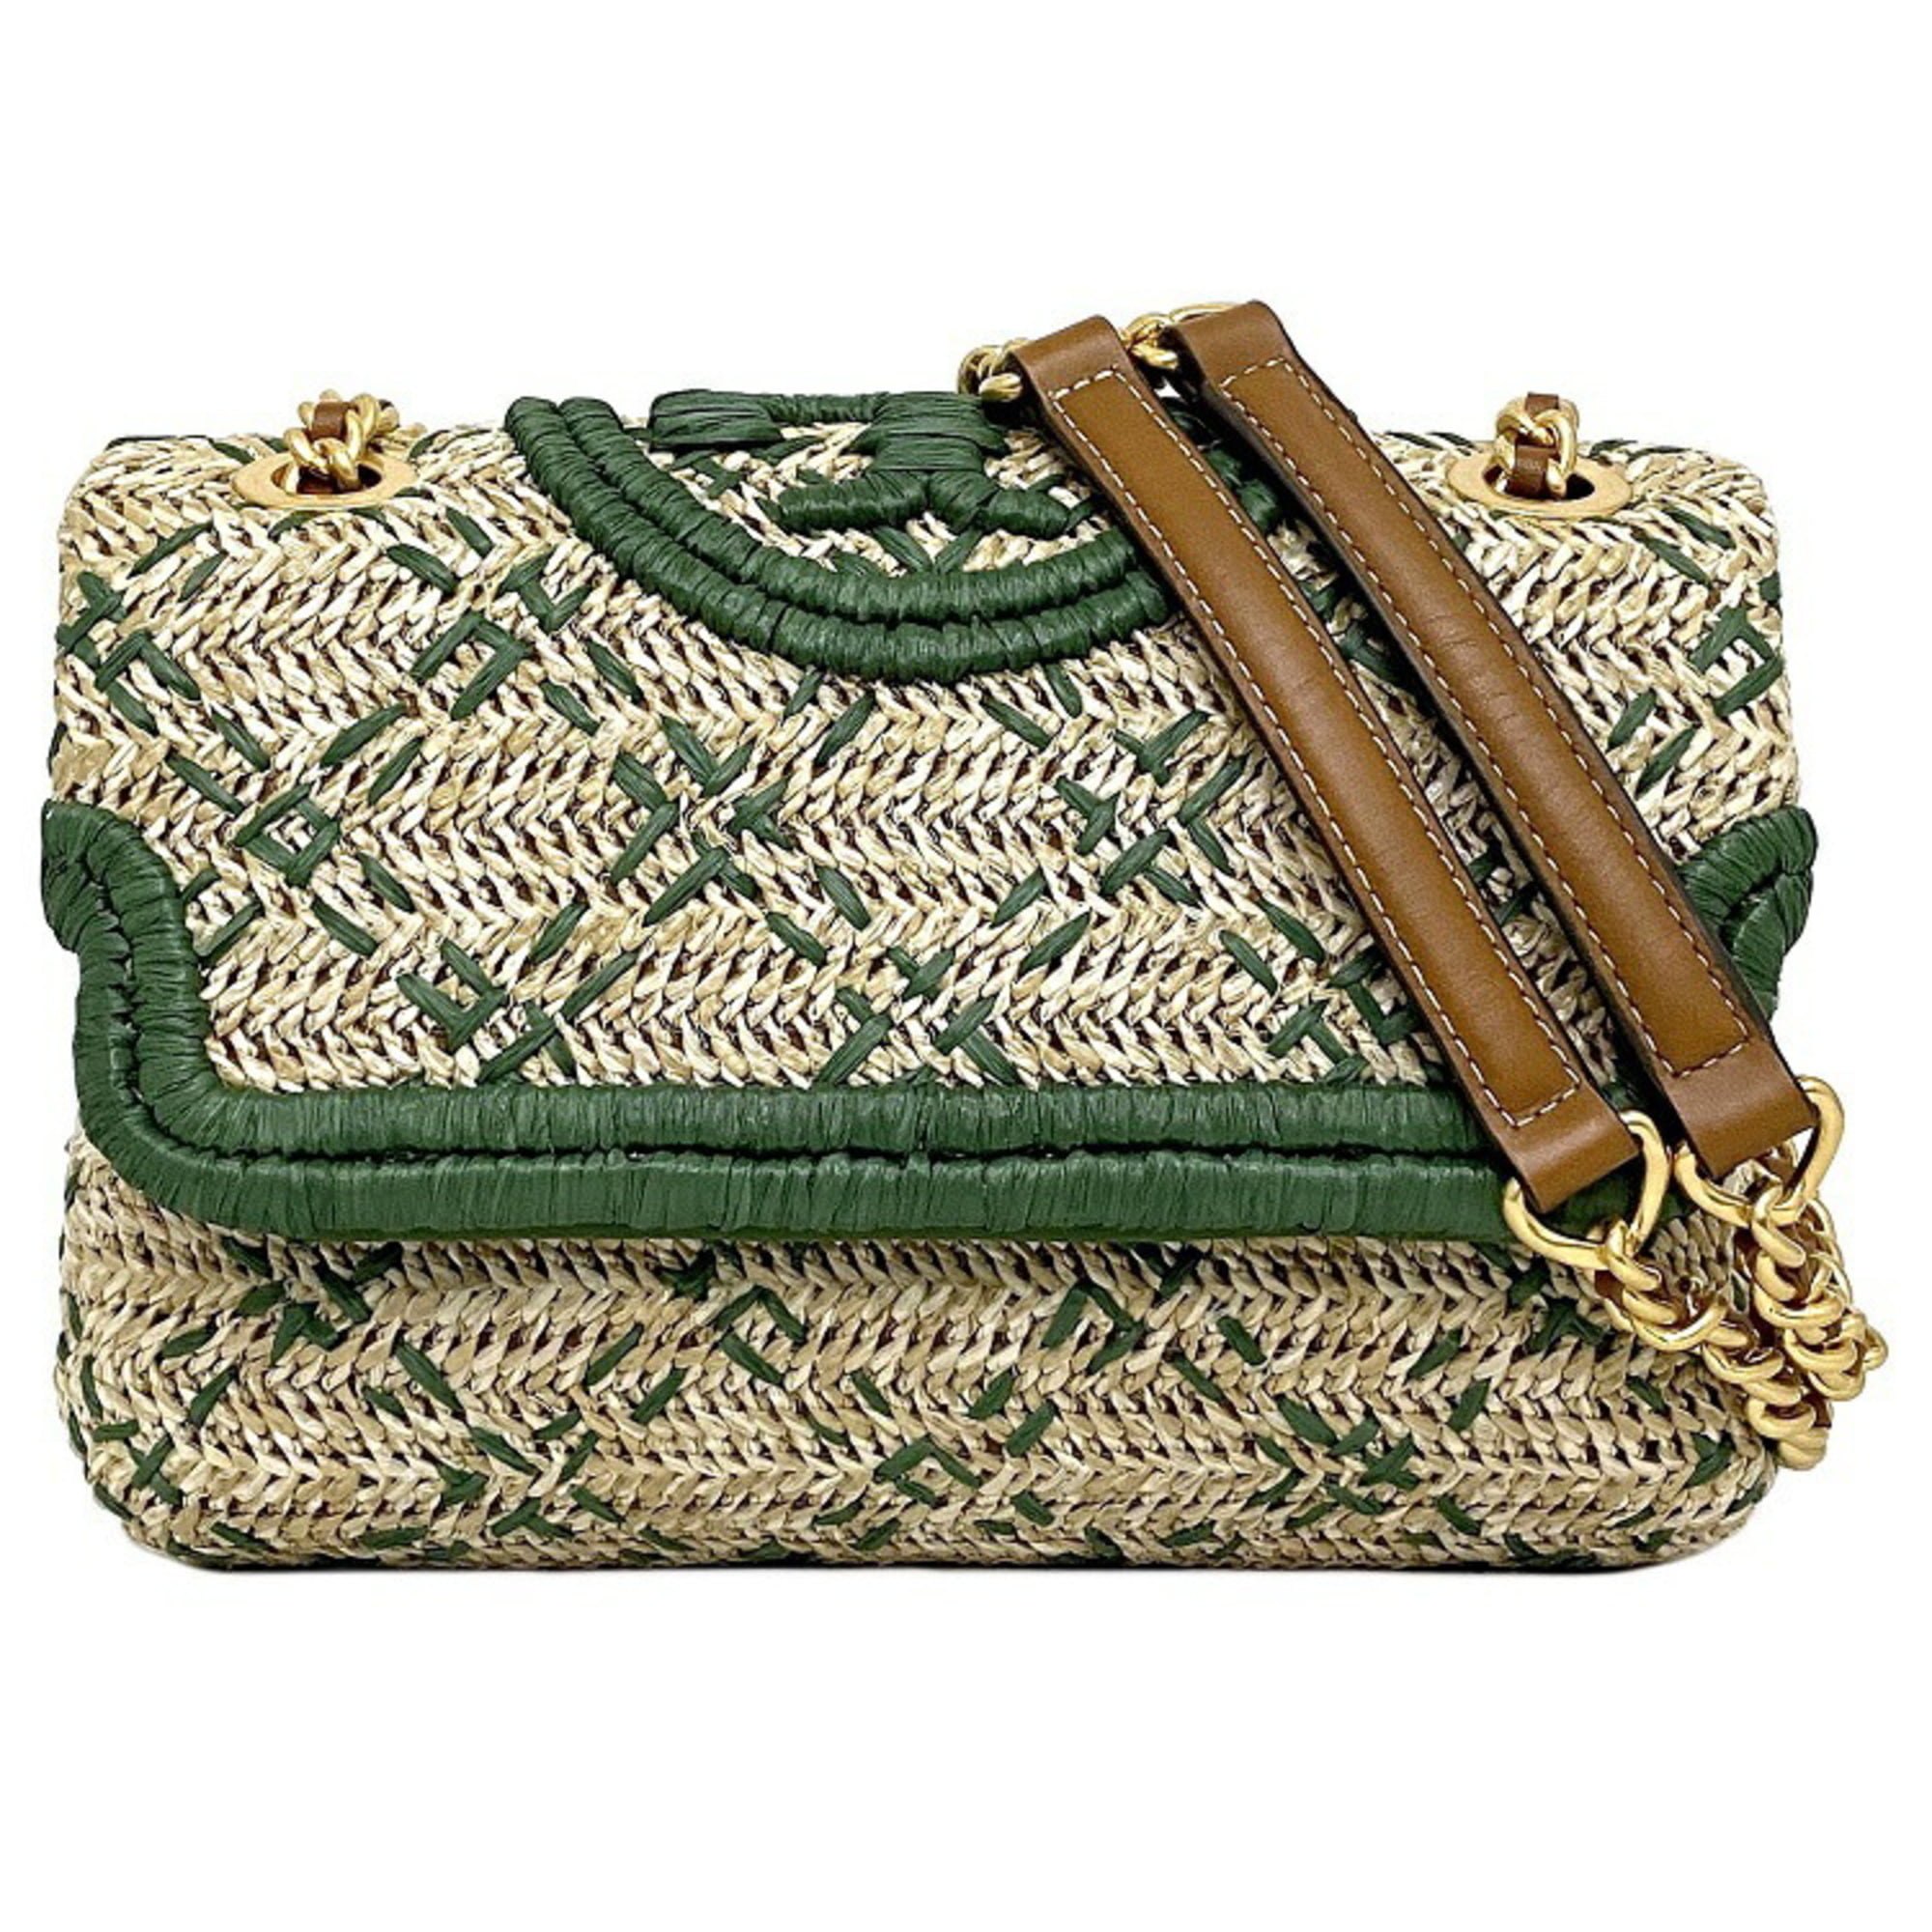 Authenticated Used Tory Burch shoulder bag beige green Fleming soft 64426  straw TORY BURCH flap push stitch embroidery 